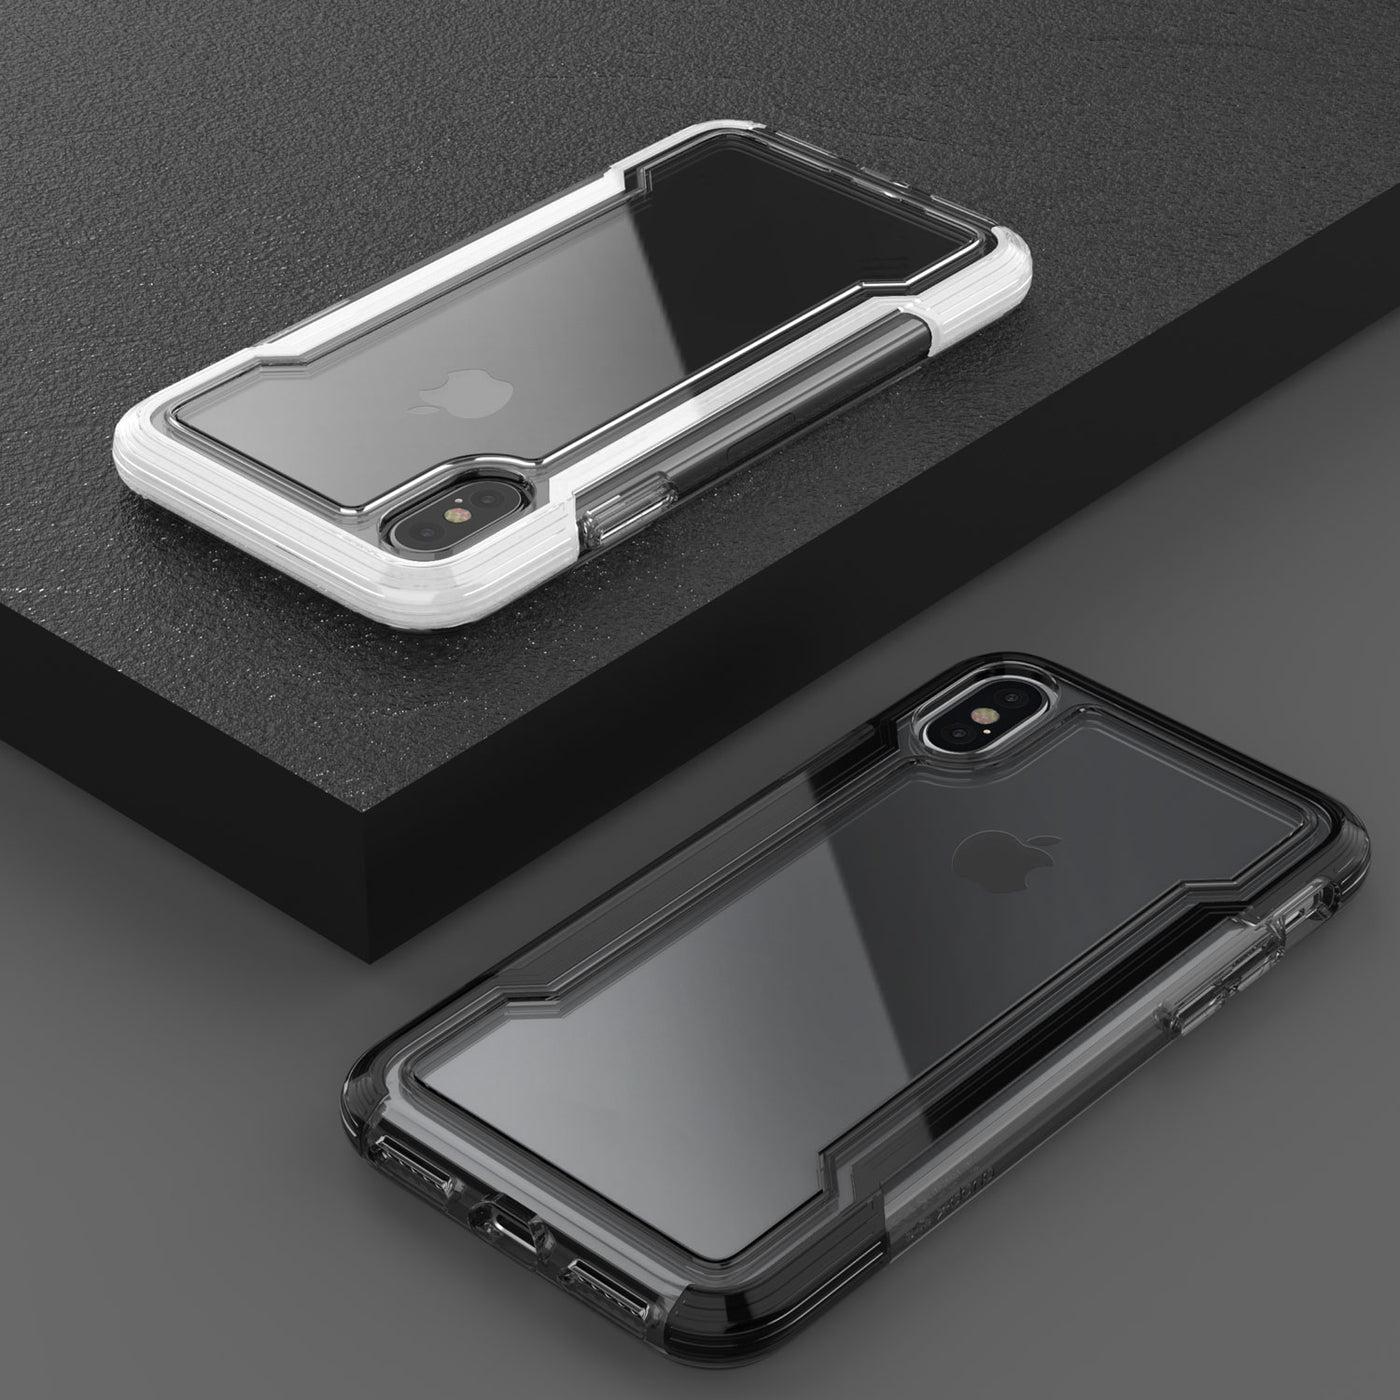 Thin Case for iPhone XS Max. Raptic Clear in black.